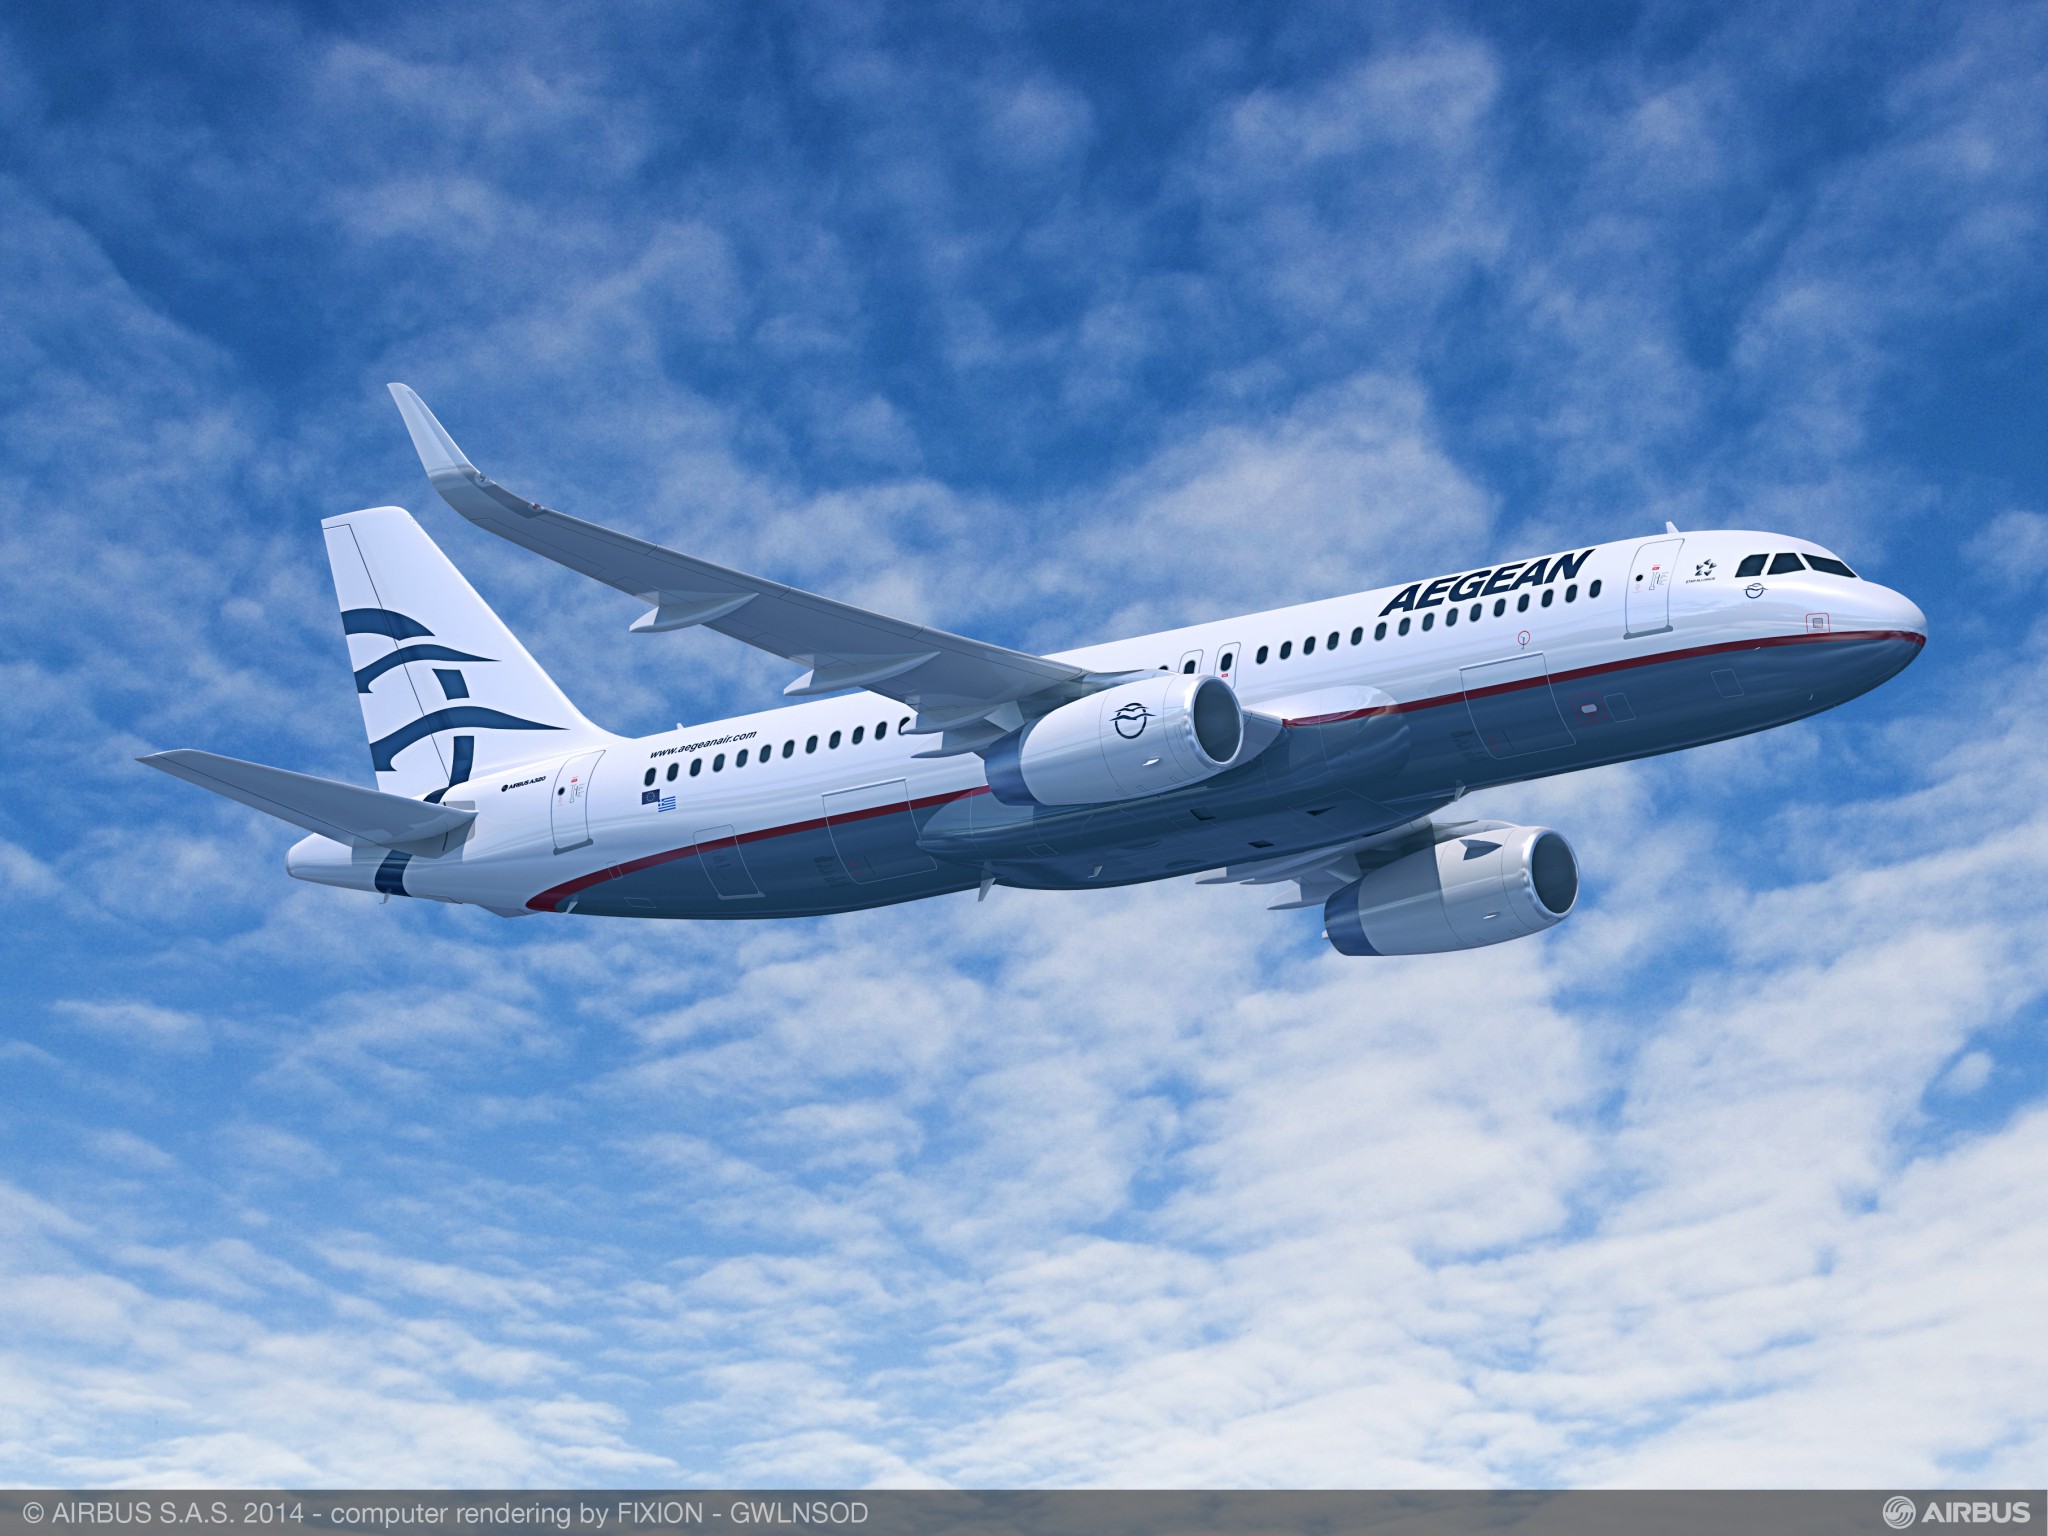 Aegean Airlines reports its 2017 results